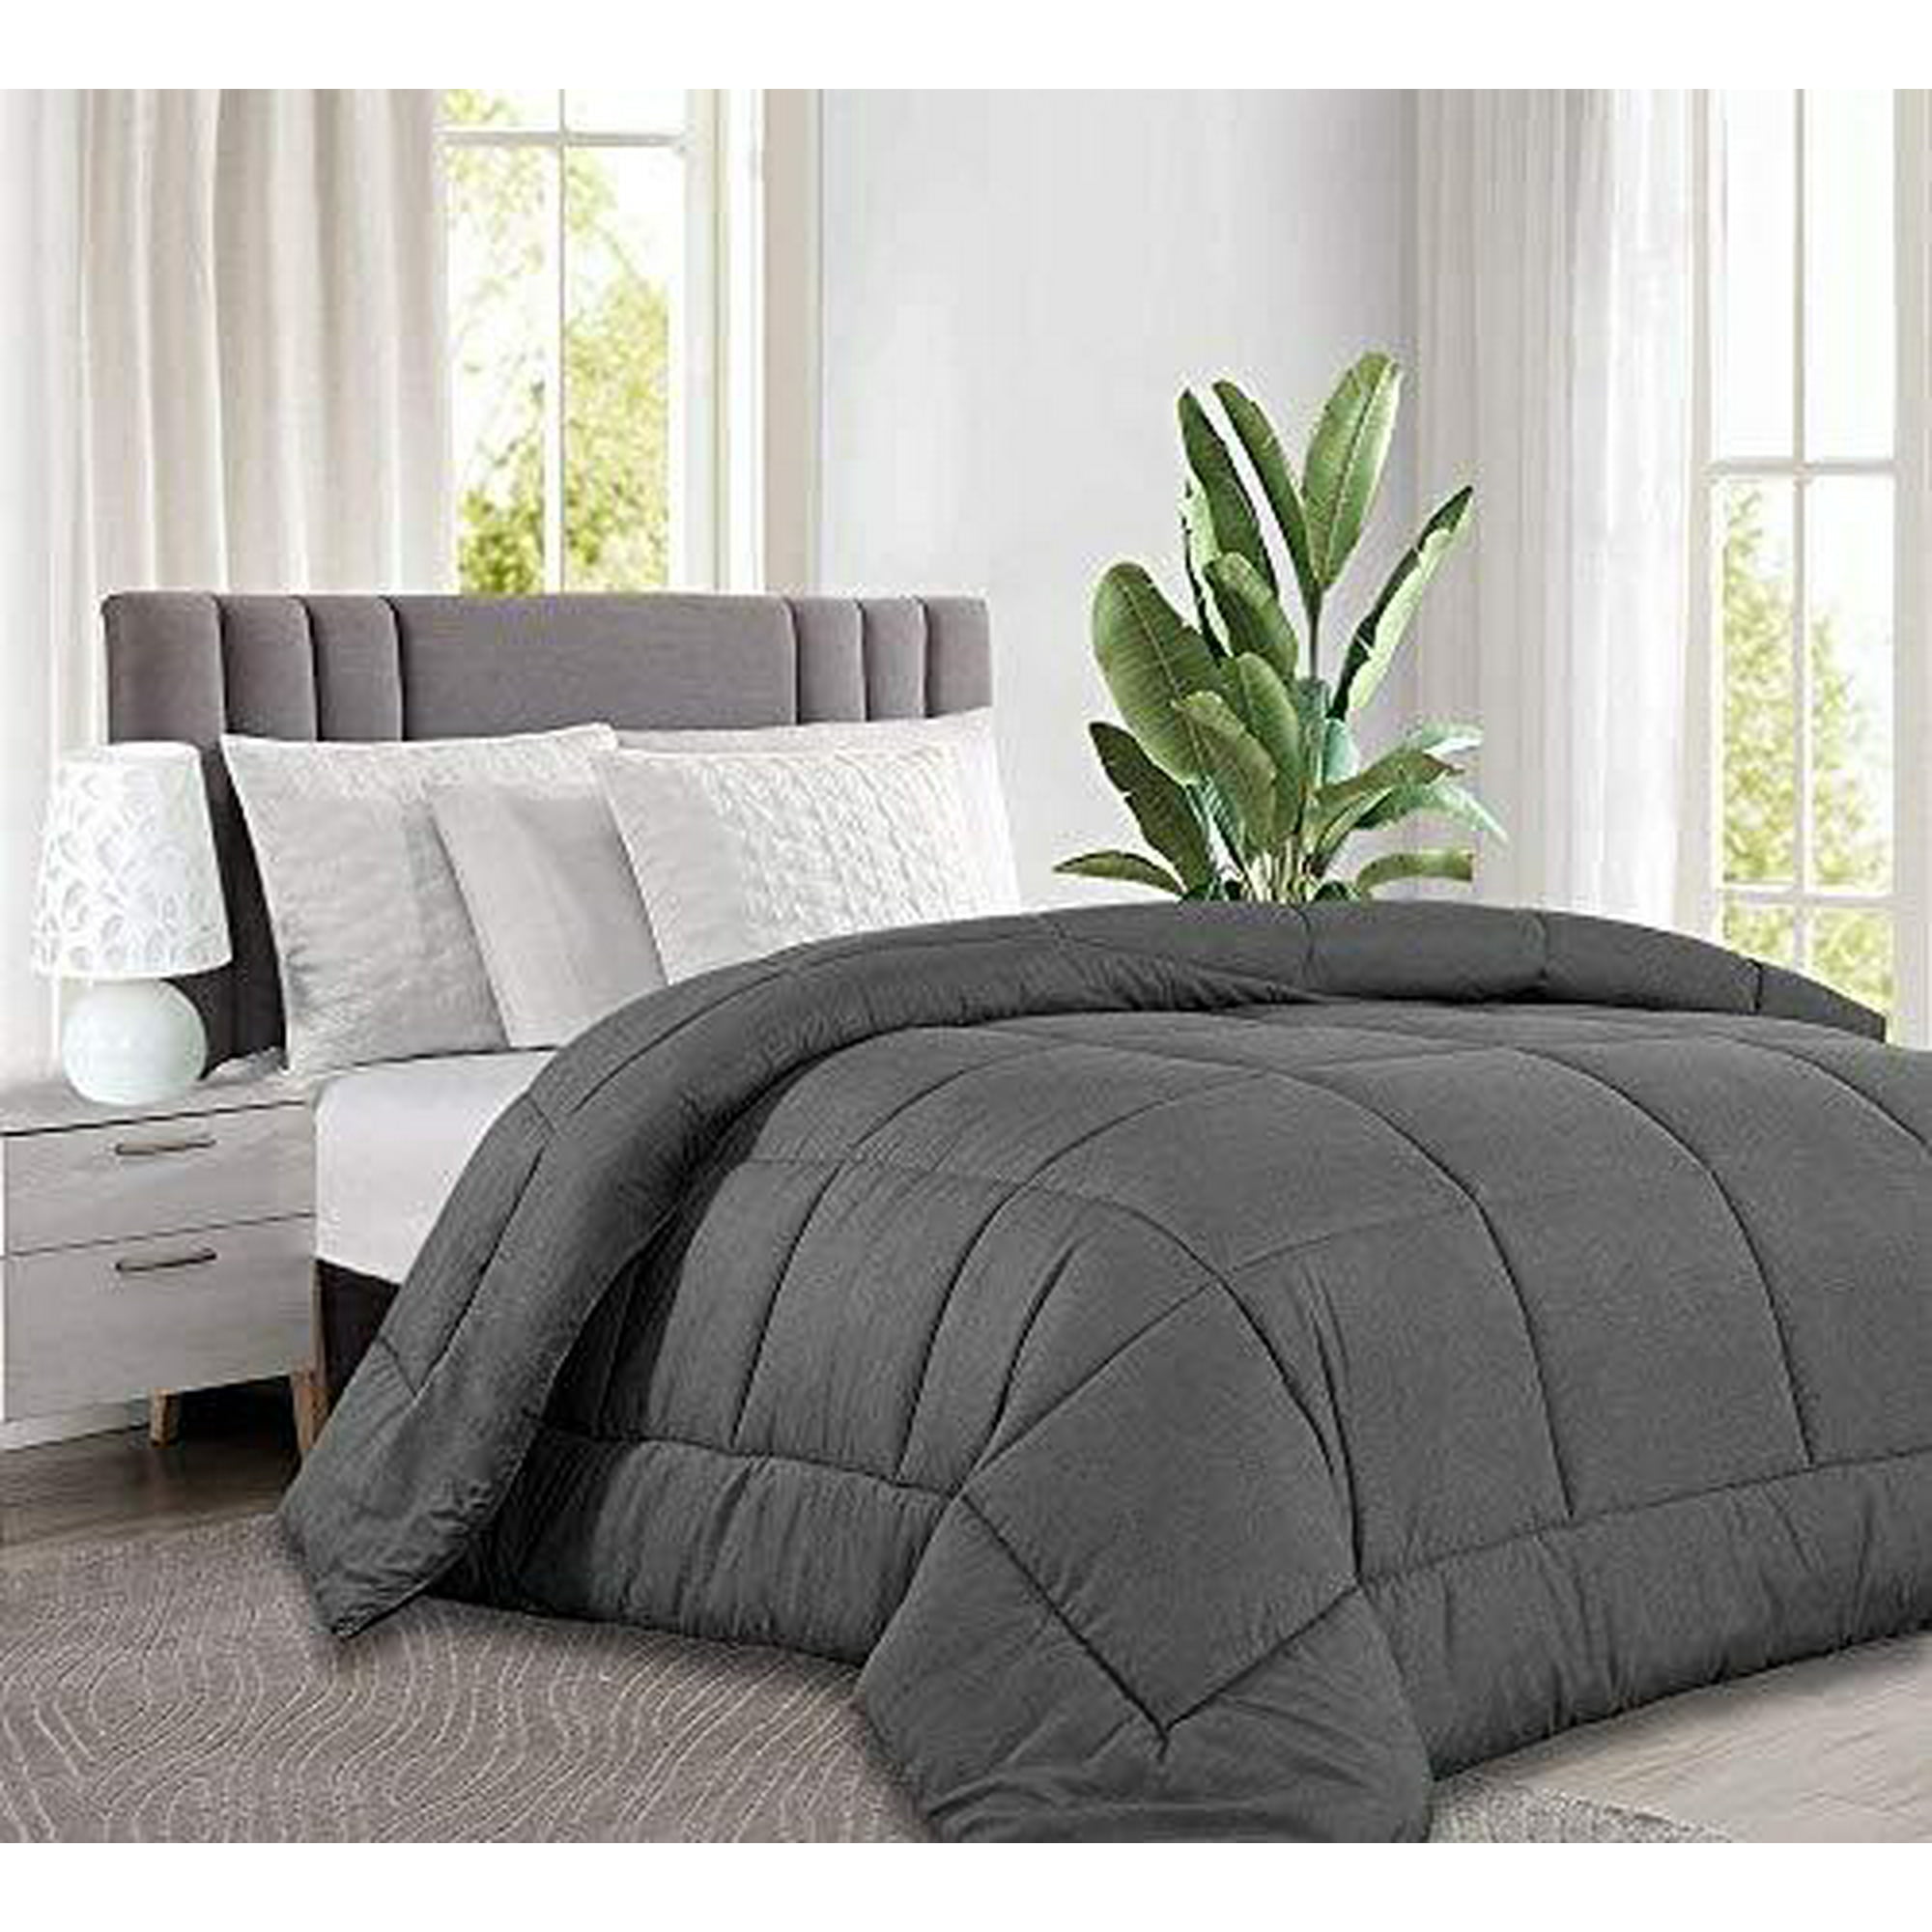 TEKAMON All Season King Comforter Soft Quilted Down Alternative Duvet  Insert with Corner Tabs,Luxury Fluffy Reversible Summer Cooling and Winter  Warm, Collection for Hotel Charcoal Grey 90 | Walmart Canada